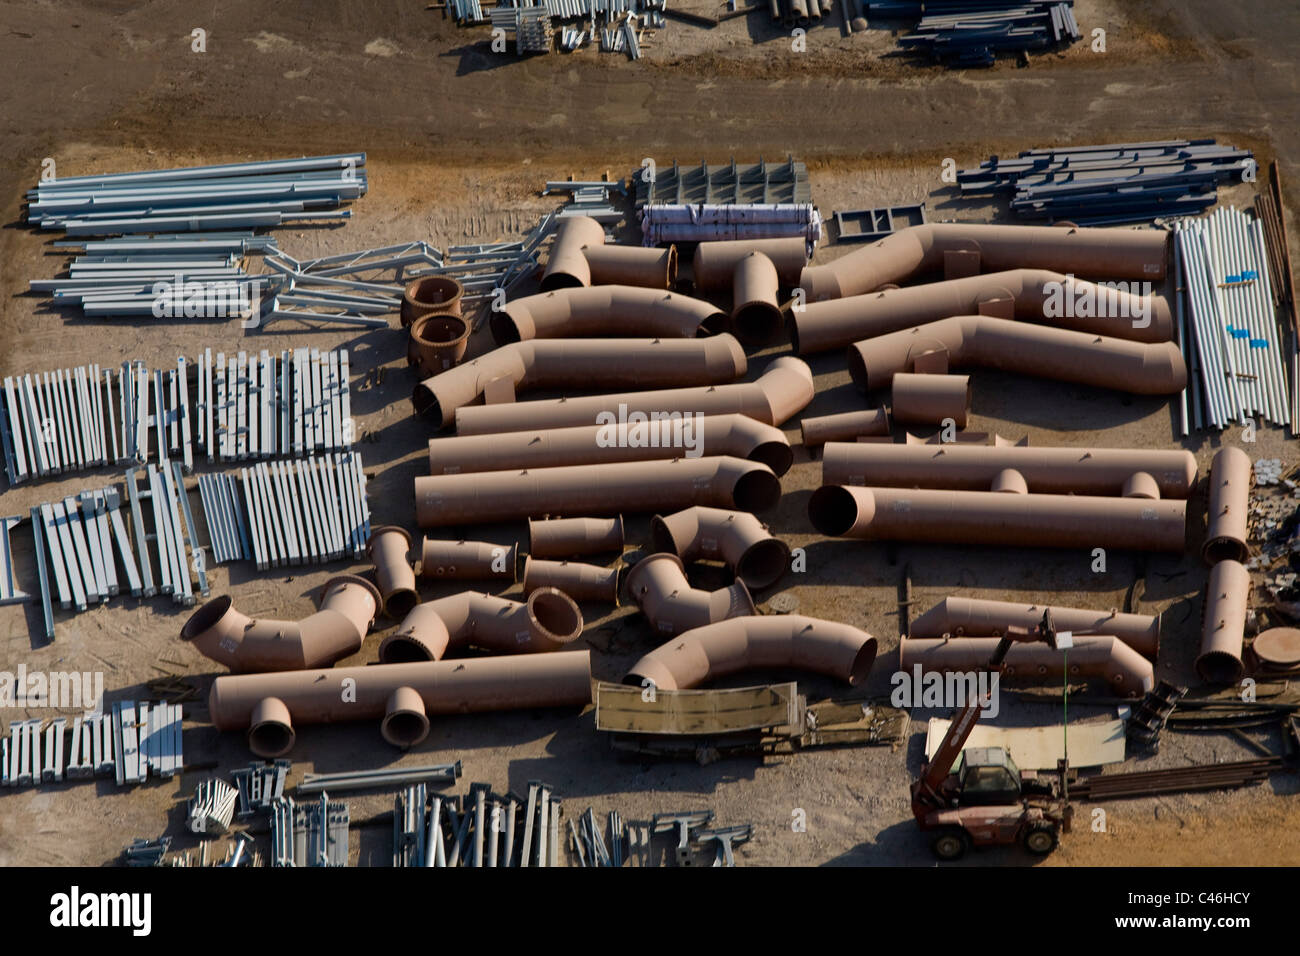 Aerial photograph of pipes Stock Photo